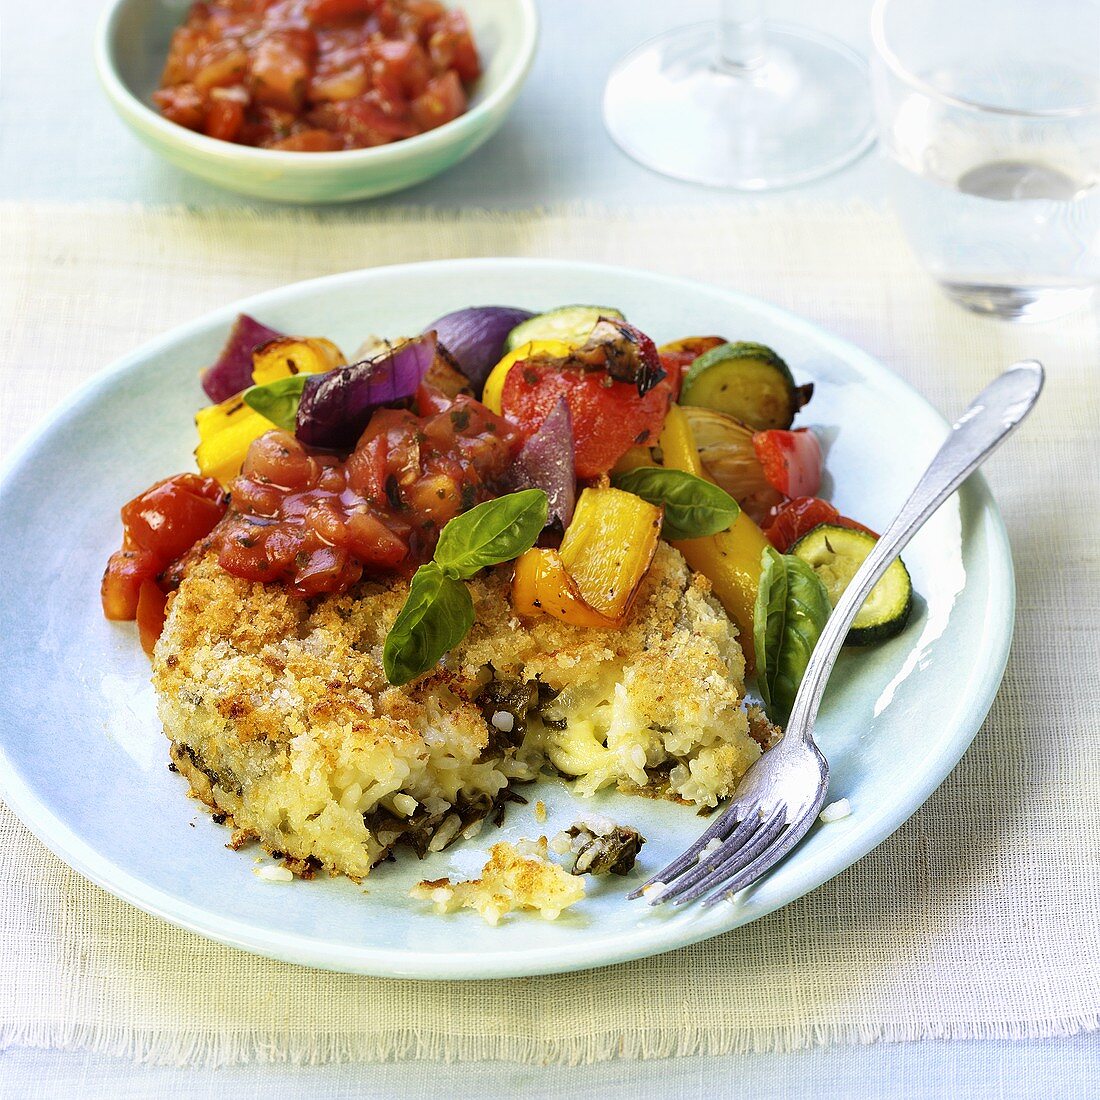 Rice burger with vegetables